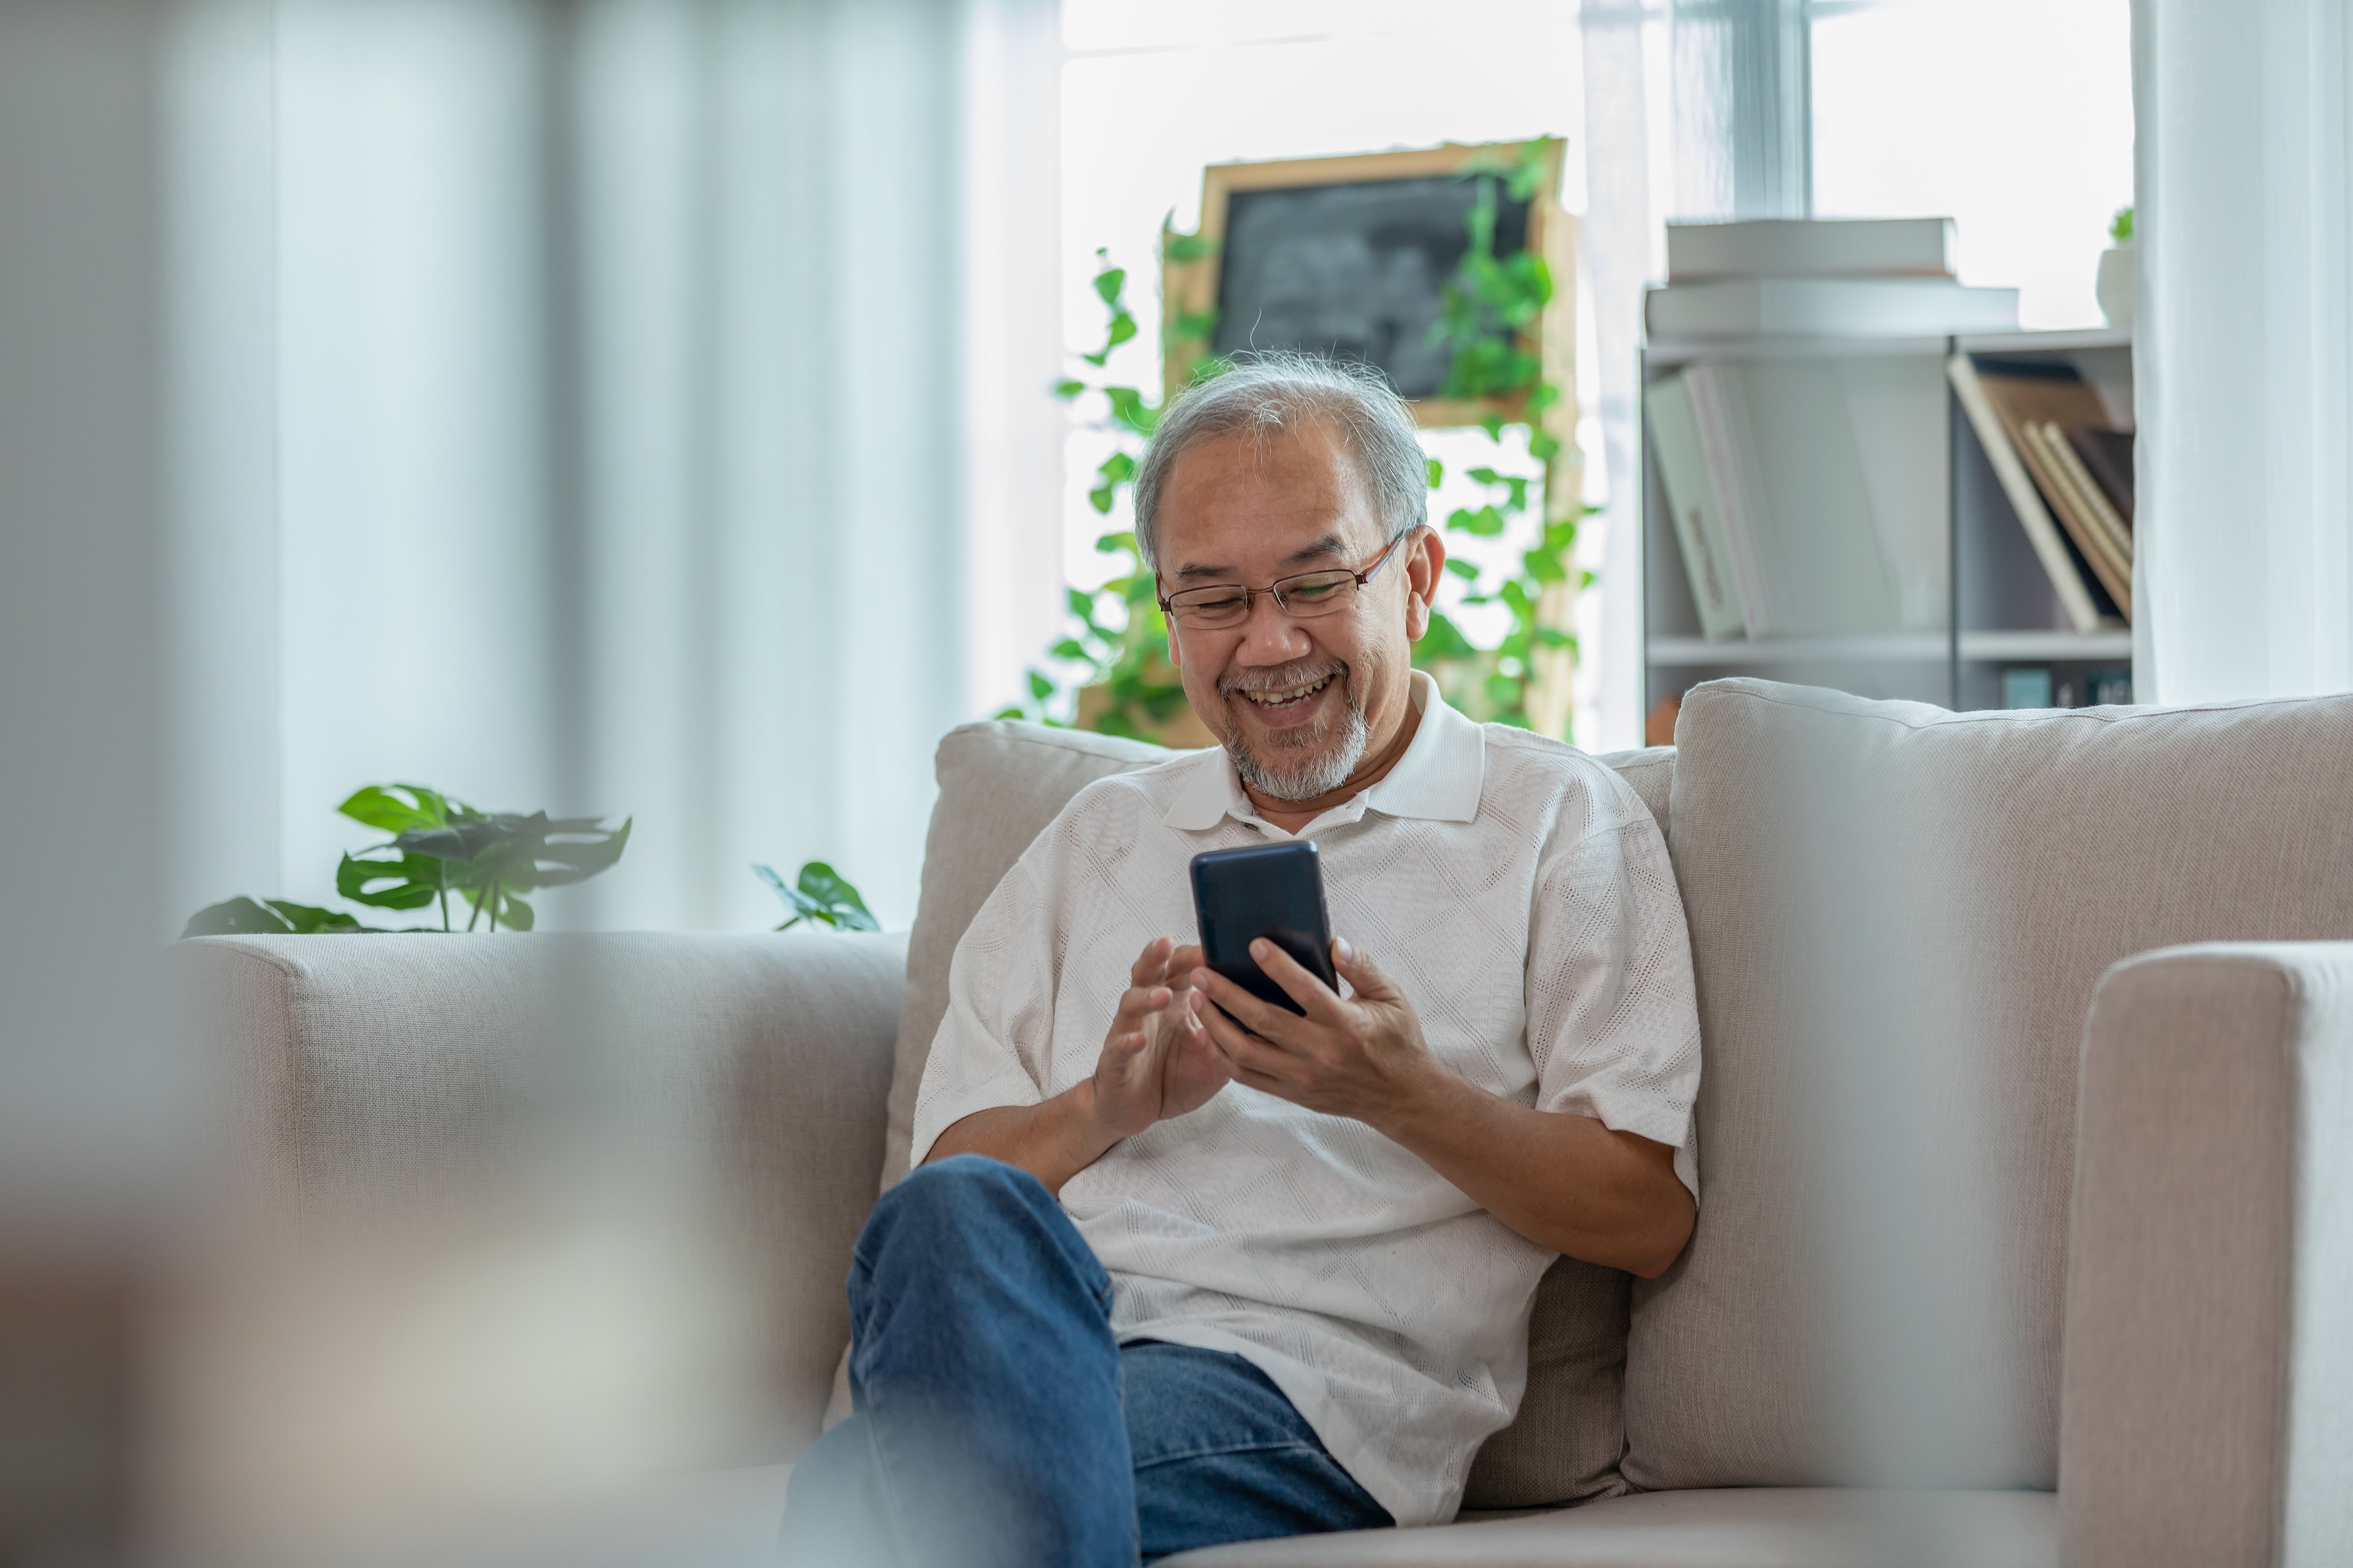 An older Asian man sits on a grey couch in a living room. He is smiling while scrolling on his phone.